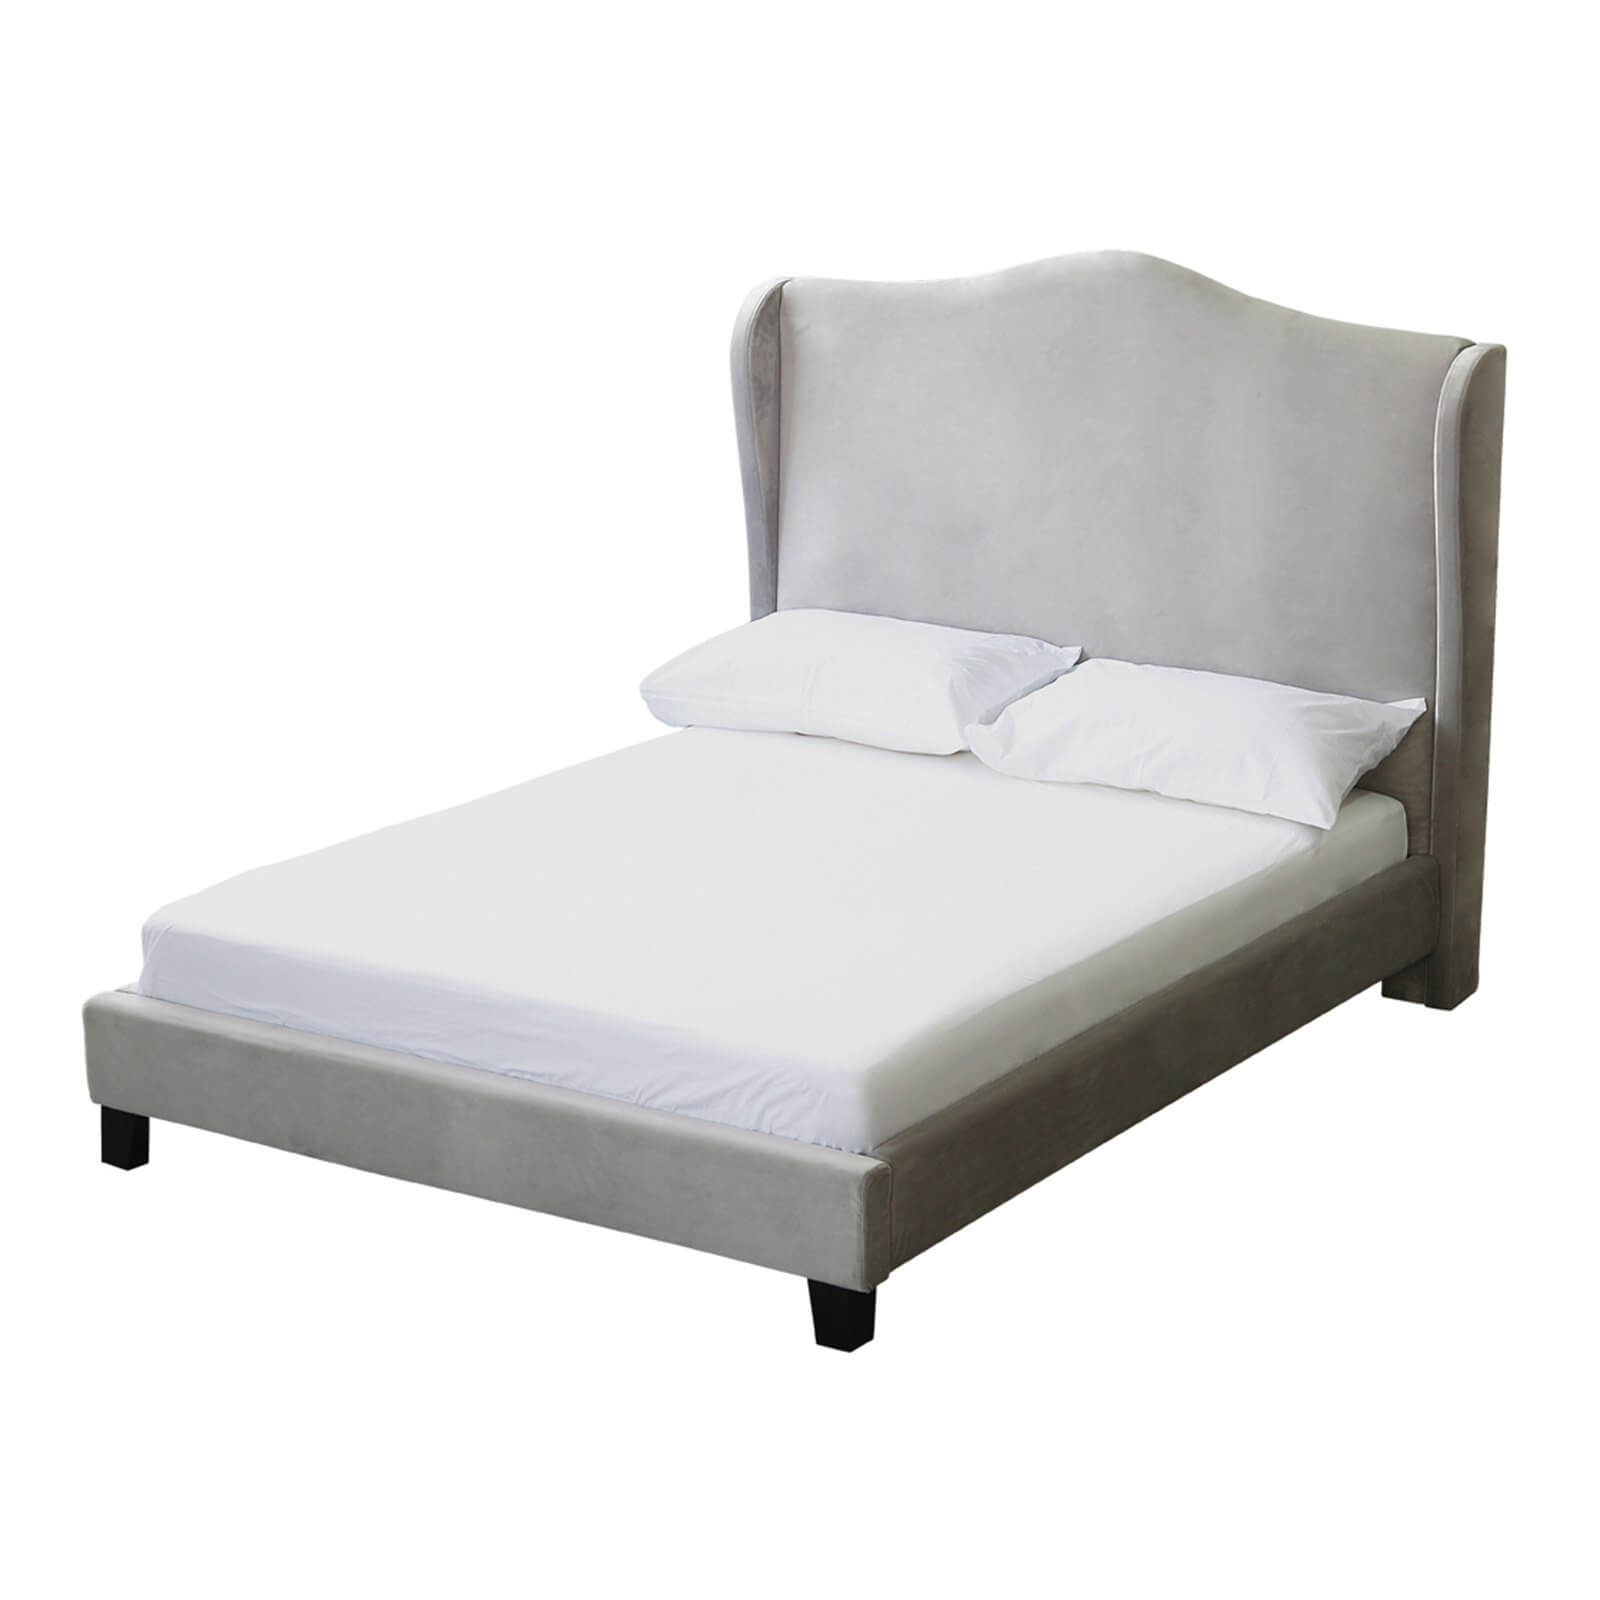 Chateaux Double Bed - Silver